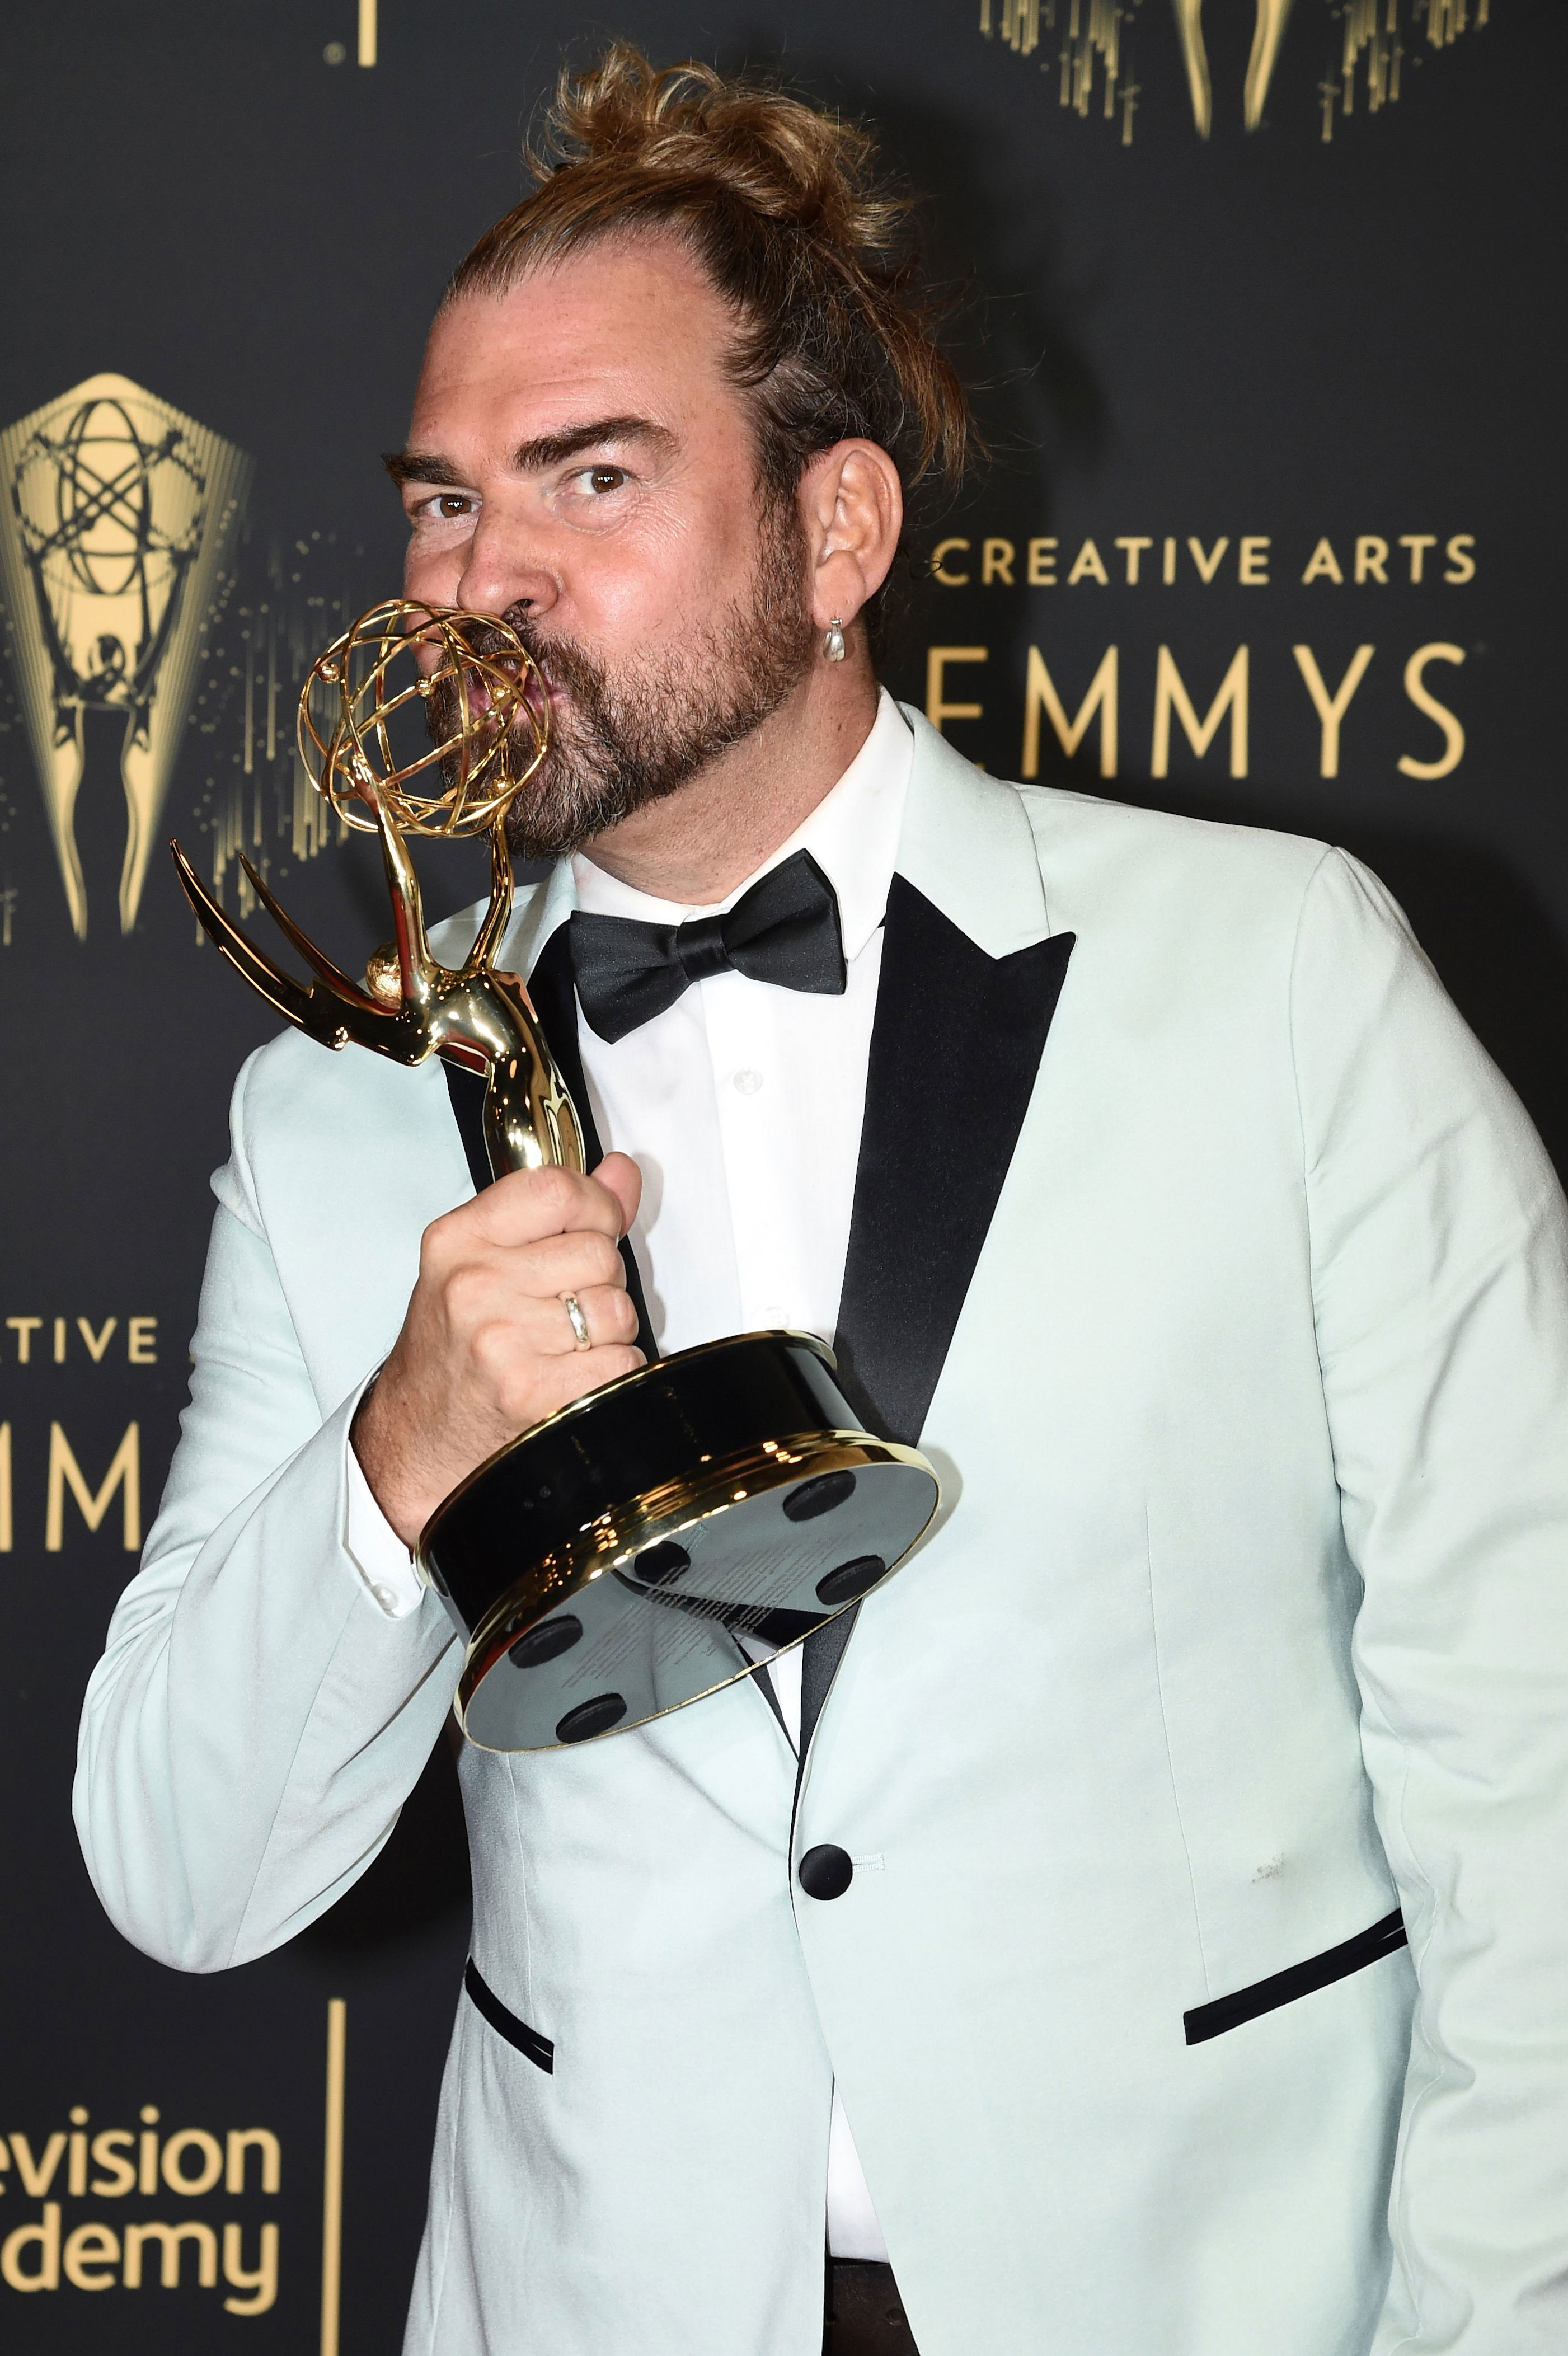 <p>On Oct. 3, 2021 -- just weeks after winning an Emmy on Sept. 11 at the 2021 Creative Arts Emmy Awards for his hairstyling work on the hit Netflix series "Bridgerton" -- Oscar-nominated hair and makeup designer Marc Pilcher died from COVID-19, his agency, Curtis Brown, confirmed to <a href="https://variety.com/2021/artisans/news/marc-pilcher-dead-dies-bridgerton-hair-makeup-1235080234/">Variety</a>. Marc, 53, was double vaccinated and had no underlying health conditions, his family told Variety, adding that he'd tested negative multiple times before traveling from Britain to Los Angeles for the Creative Arts Emmys ceremony and that not long after his return home, he became sick and his condition quickly deteriorated. Marc notably worked on London's West End on many theater productions as well as on Hollywood projects including "Mary Queen of Scots" with Saoirse Ronan and Margot Robbie (for which he earned his Academy Award nod), "Downton Abbey," "Beauty and the Beast," "My Week With Marilyn" and more. "So heartbroken by the loss of Marc Pilcher, the brilliant and visionary Hair and Makeup designer for Bridgerton Season One," "Bridgerton" star Nicola Coughlan shared on Instagram. "Marc was so passionate about his work and so tremendously talented. Not even a month ago he won his first Emmy award. It's a tragedy that he's been taken so young when he had so much yet to do."</p>